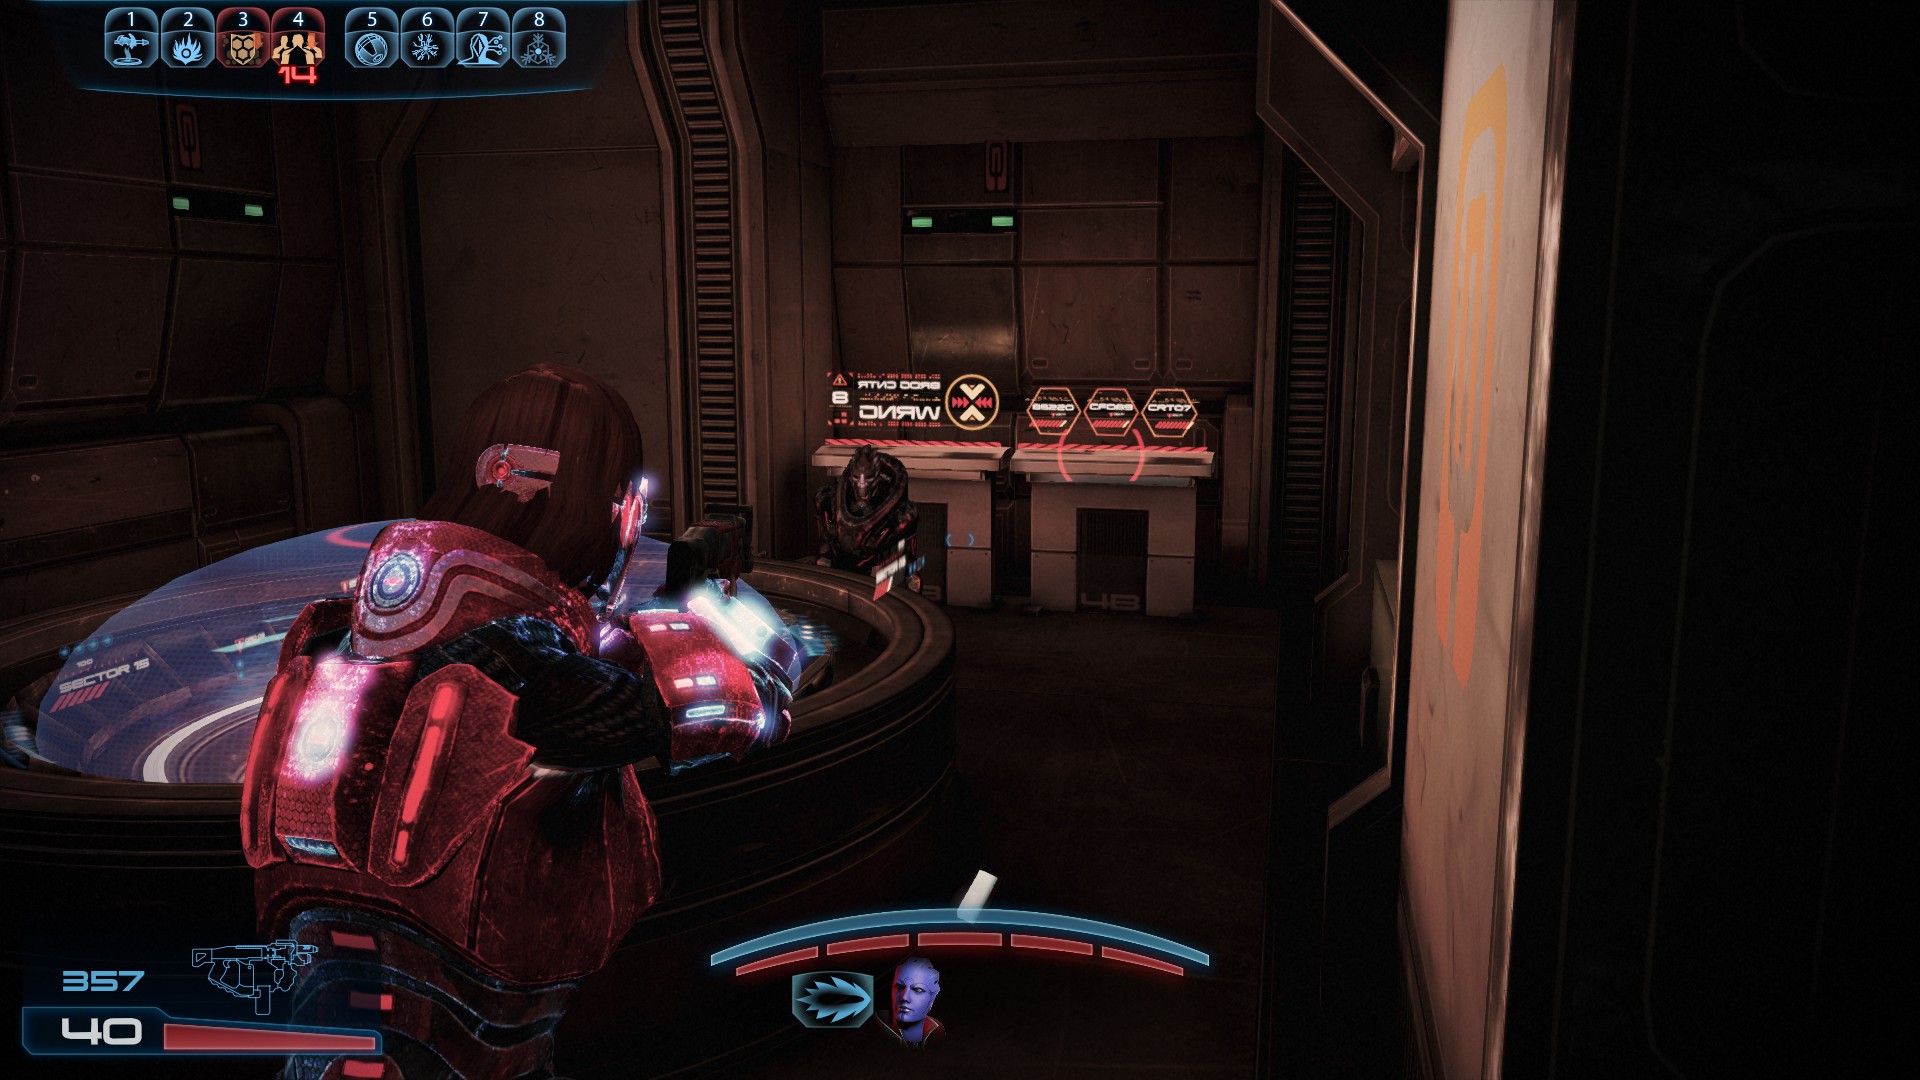 Mass Effect™ Legendary Edition - All Missions Locations + Side Quest Guide - Omega: Assist the hacker - A3F8456